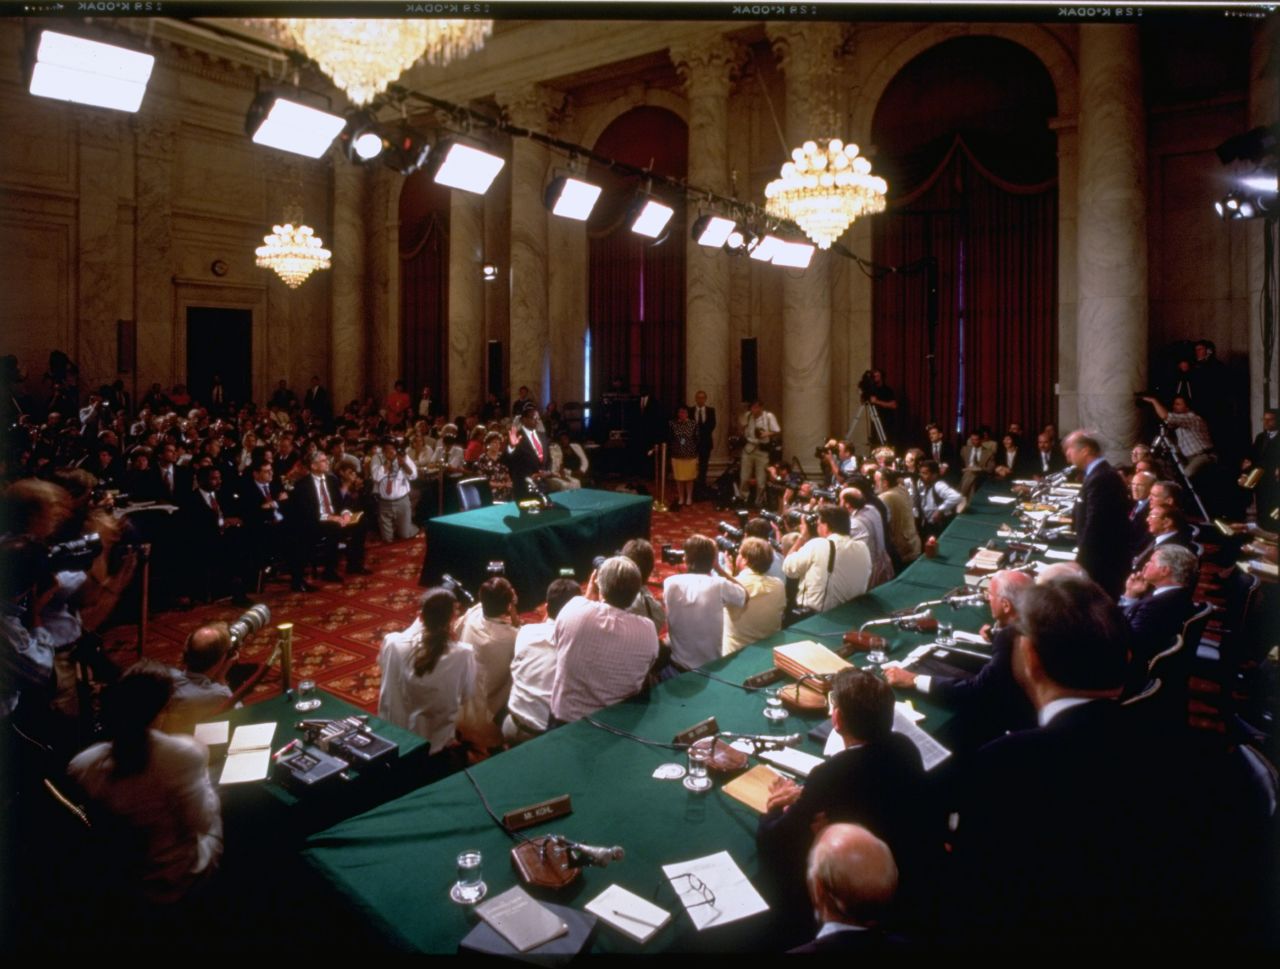 Thomas faces a Senate committee on the first day of his confirmation hearings.